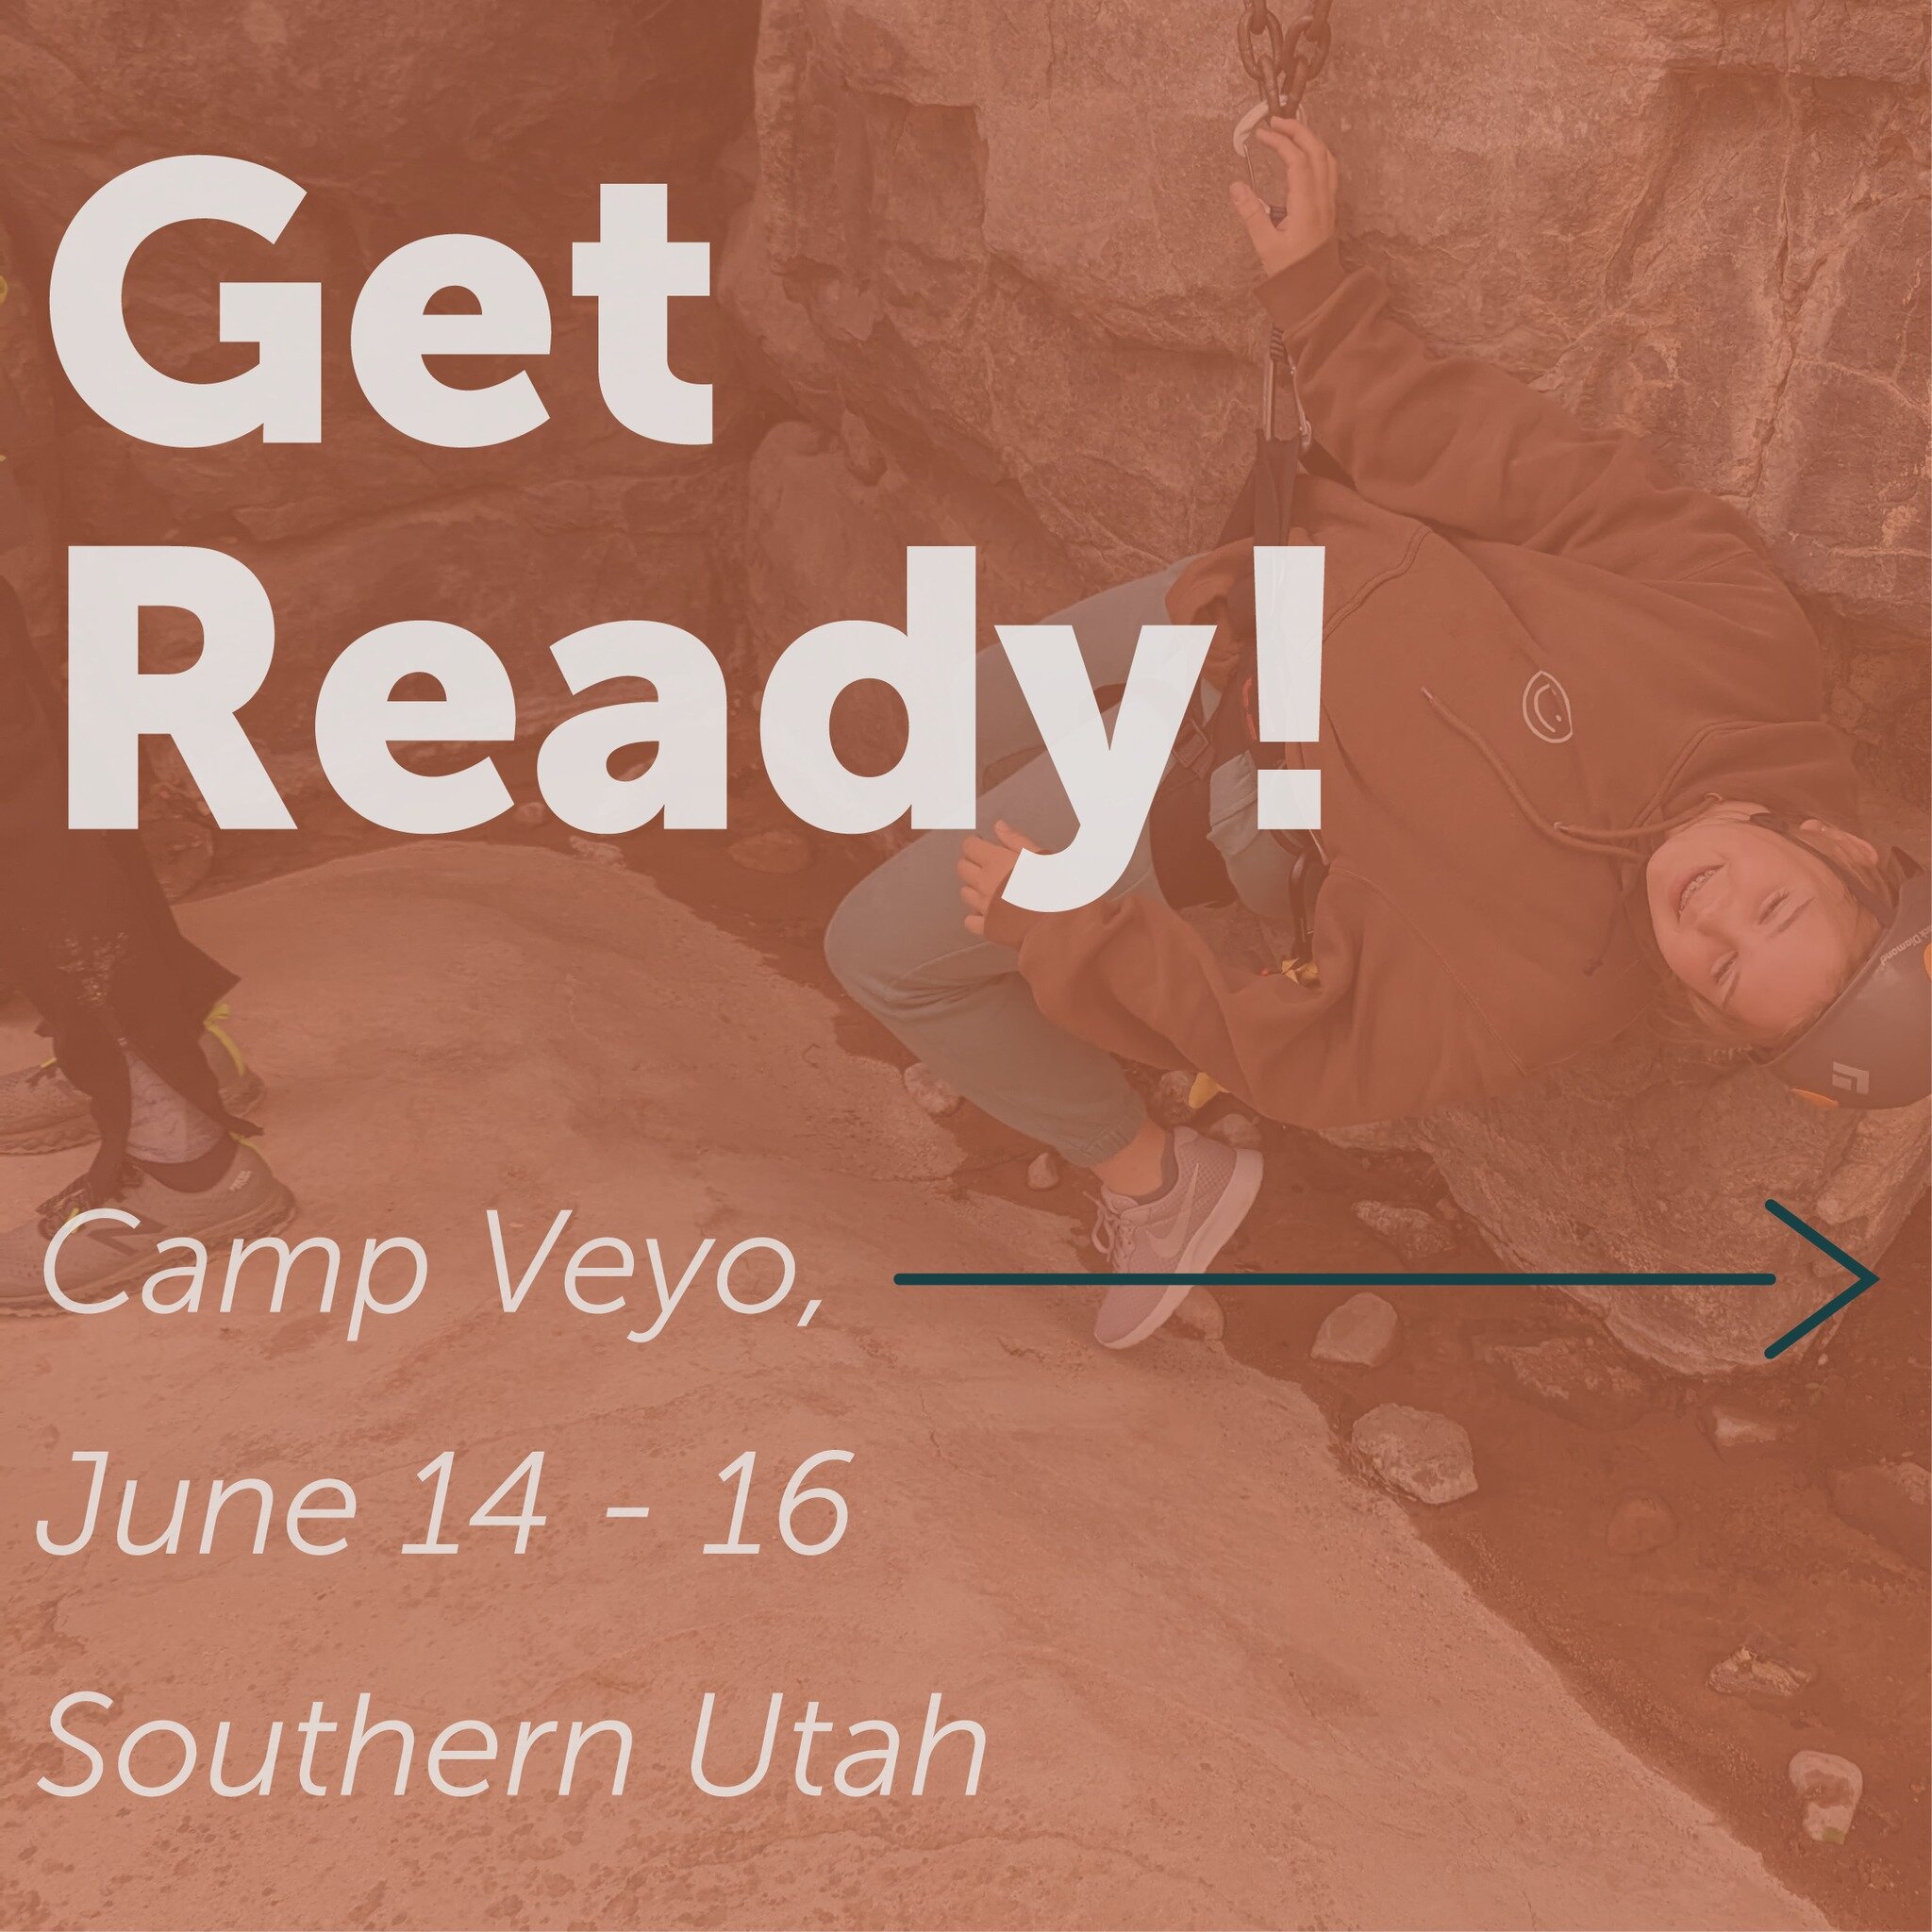 You want a better relationship with your teen - we've got just the thing. Come to our first camp of 2024 in Southern Utah at Veyo Pool. Our program is designed to connect you and your teen like never before - adventure, learn, and serve together.

Go